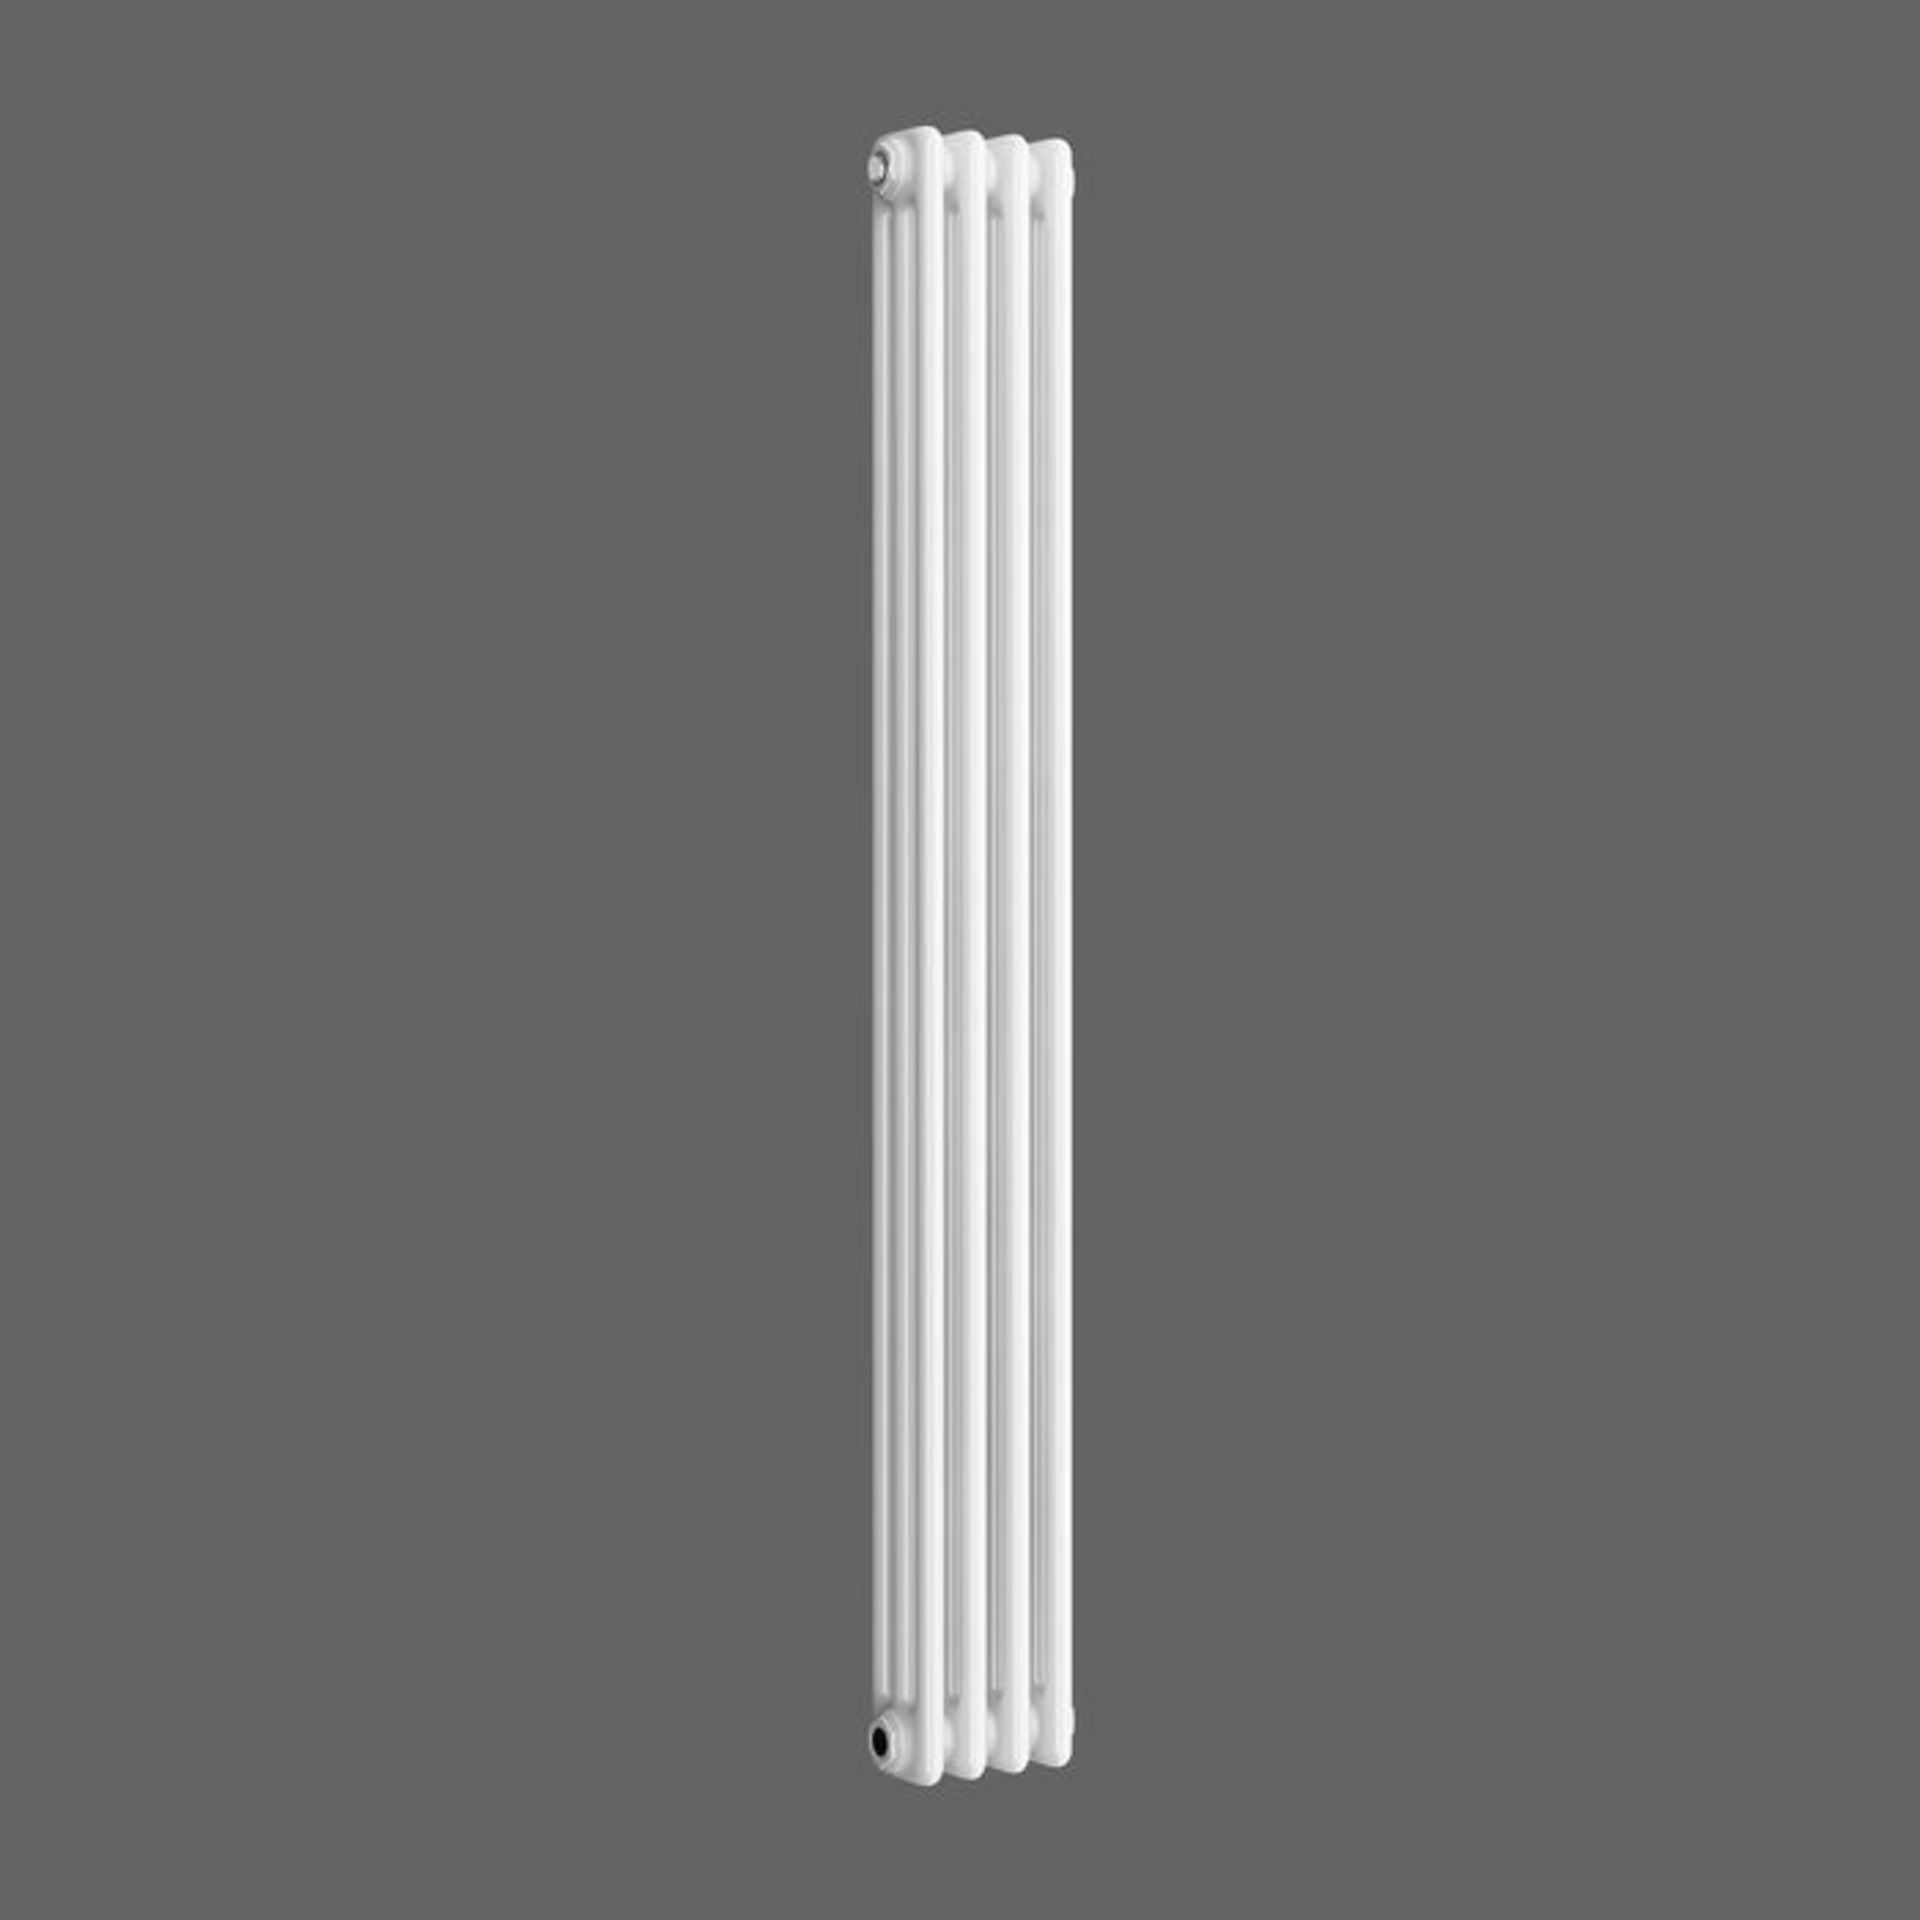 (NY170) 1500x200mm White Triple Panel Vertical Colosseum Traditional Radiator. RRP £331.99. Made - Image 3 of 3